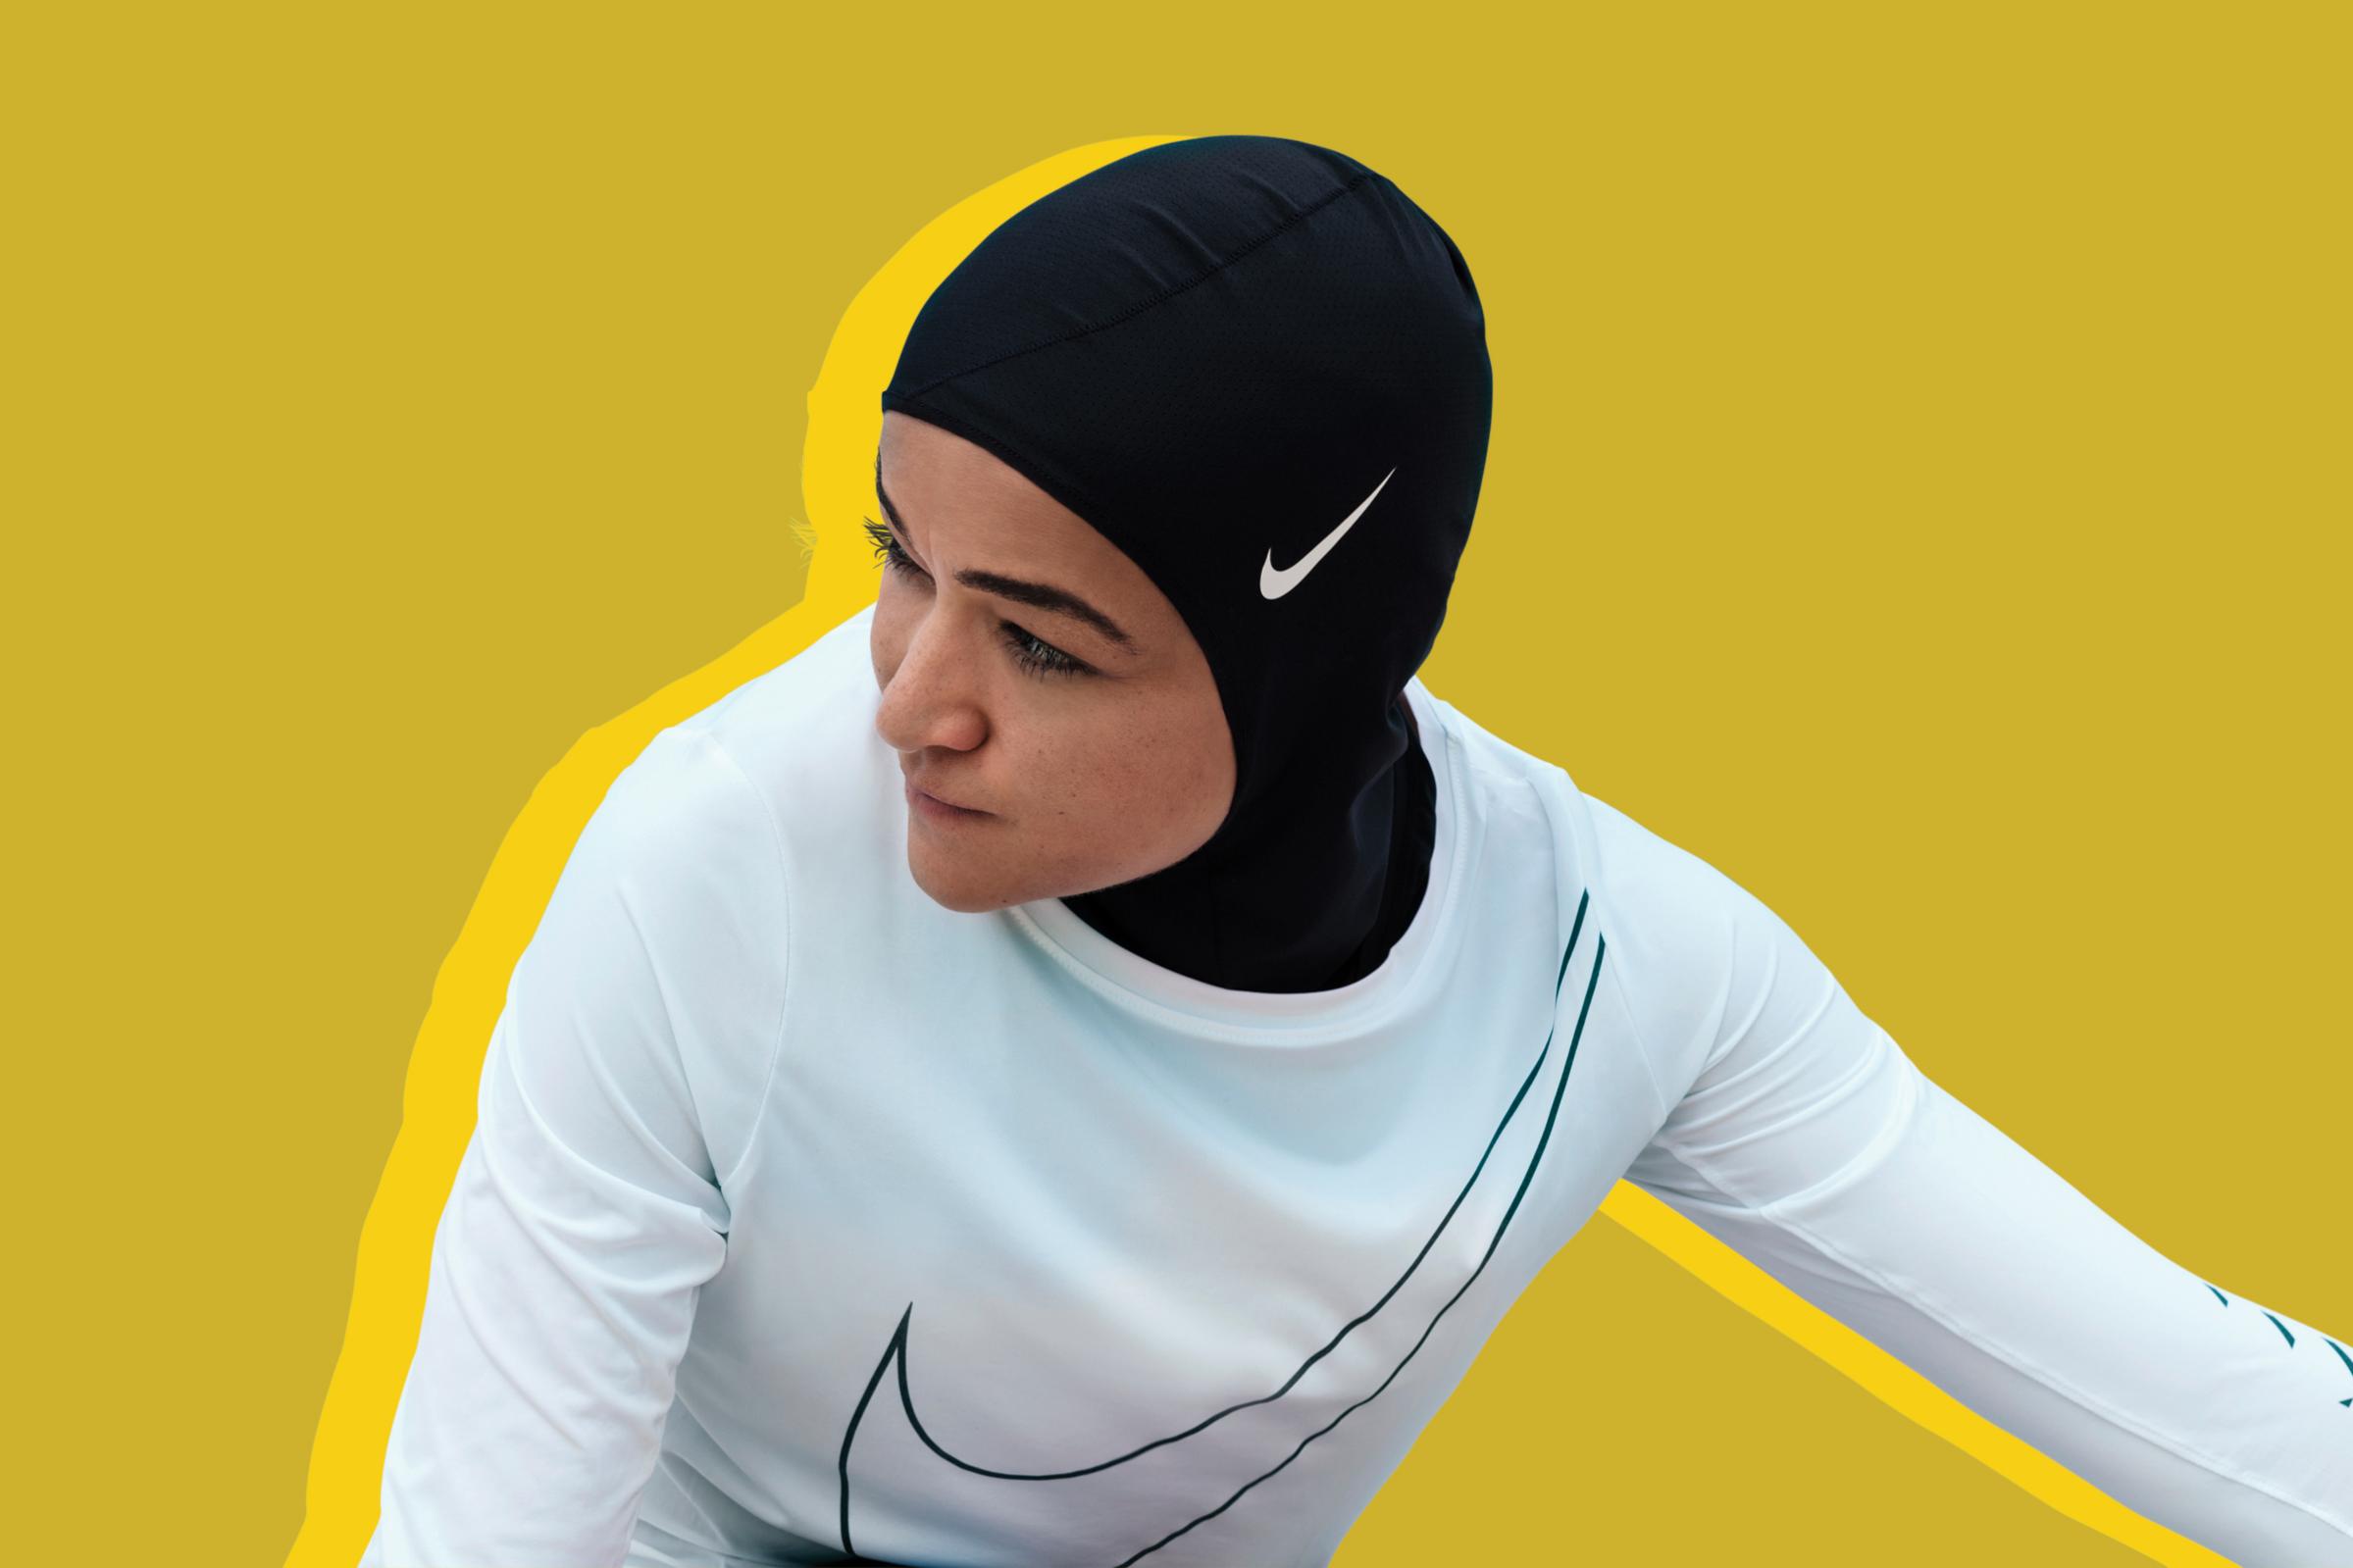 The Nike Pro Hijab is one of the best inventions of 2017